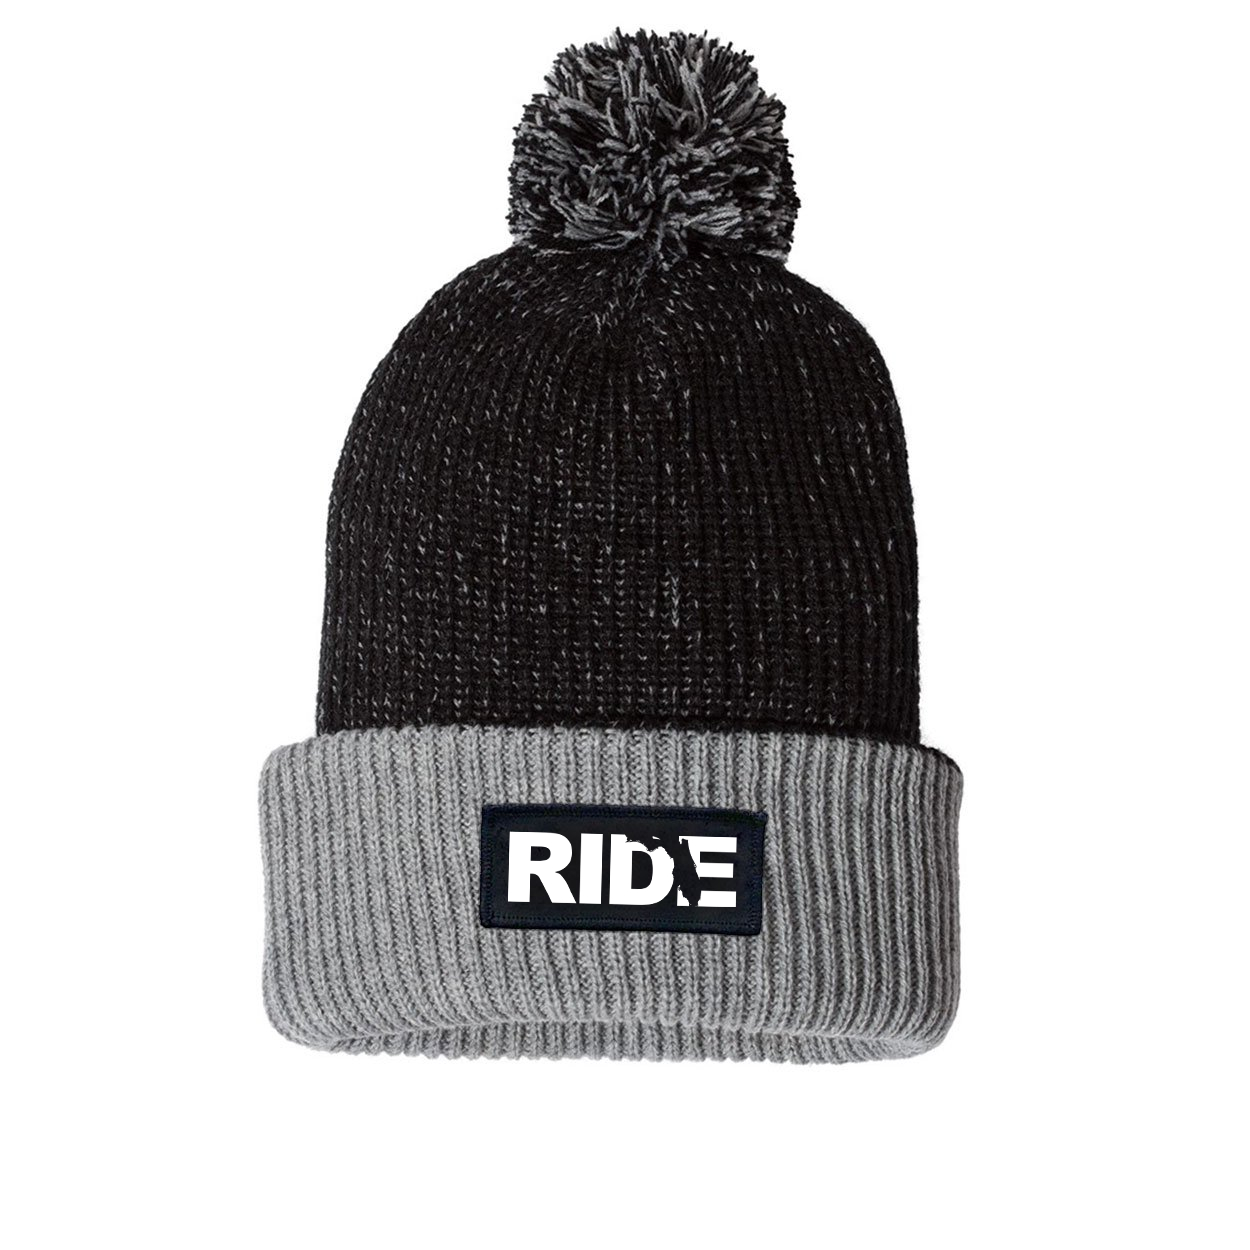 Ride Florida Night Out Woven Patch Roll Up Pom Knit Beanie Black/Gray (White Logo)